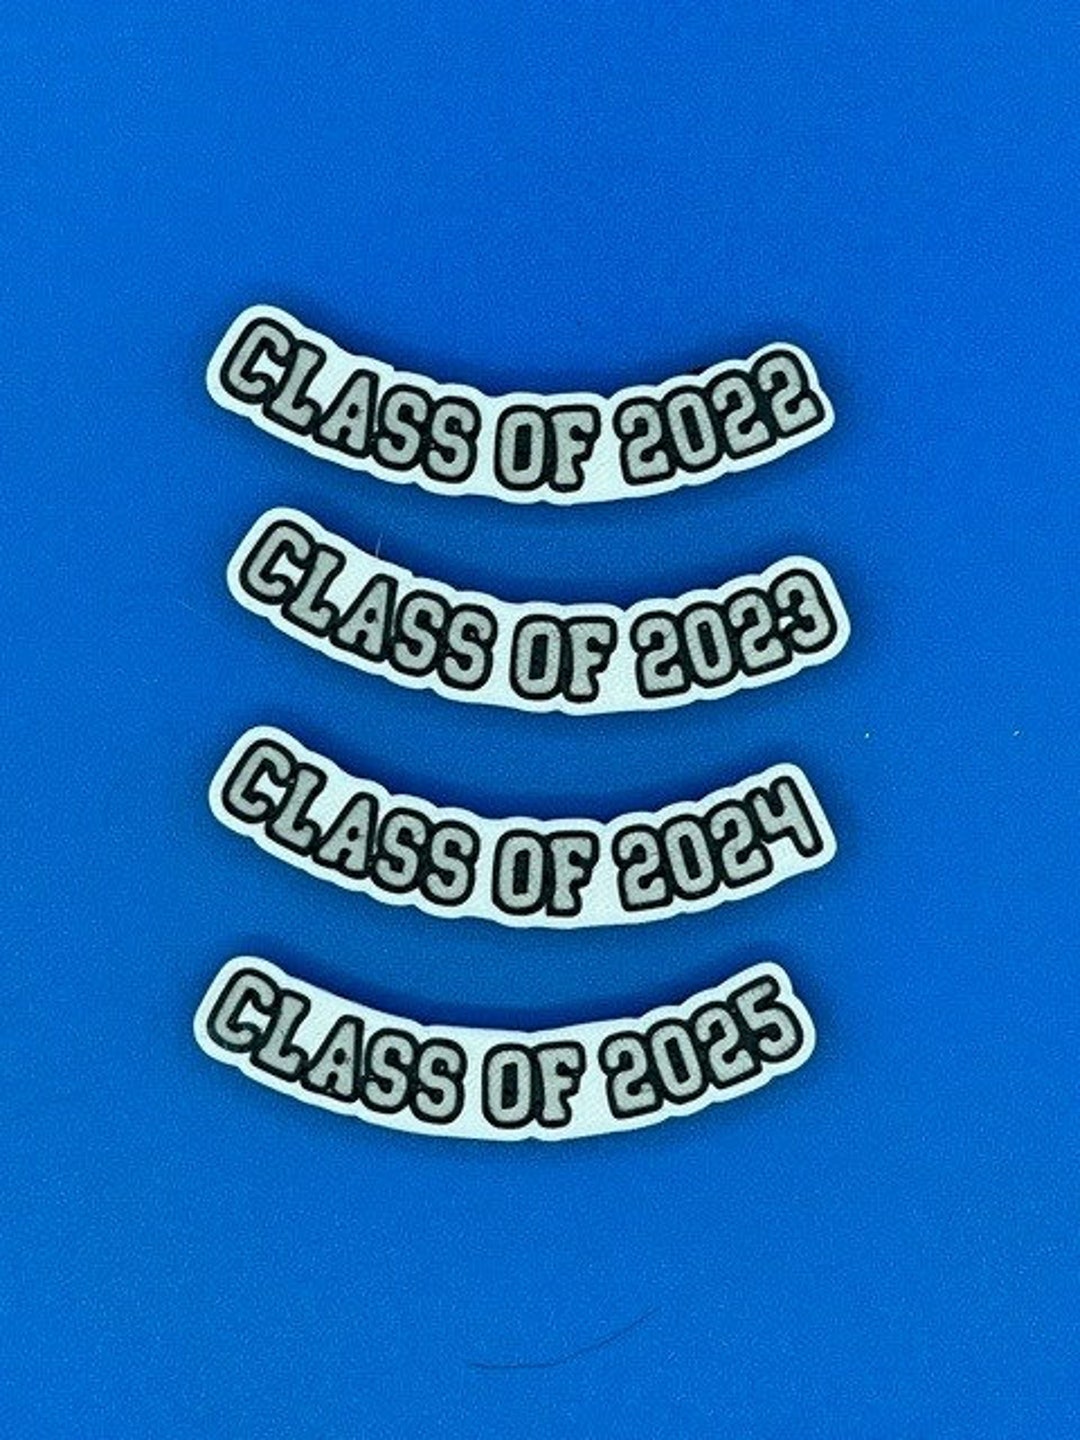 Class of 2022 2023 2024 or 2025 